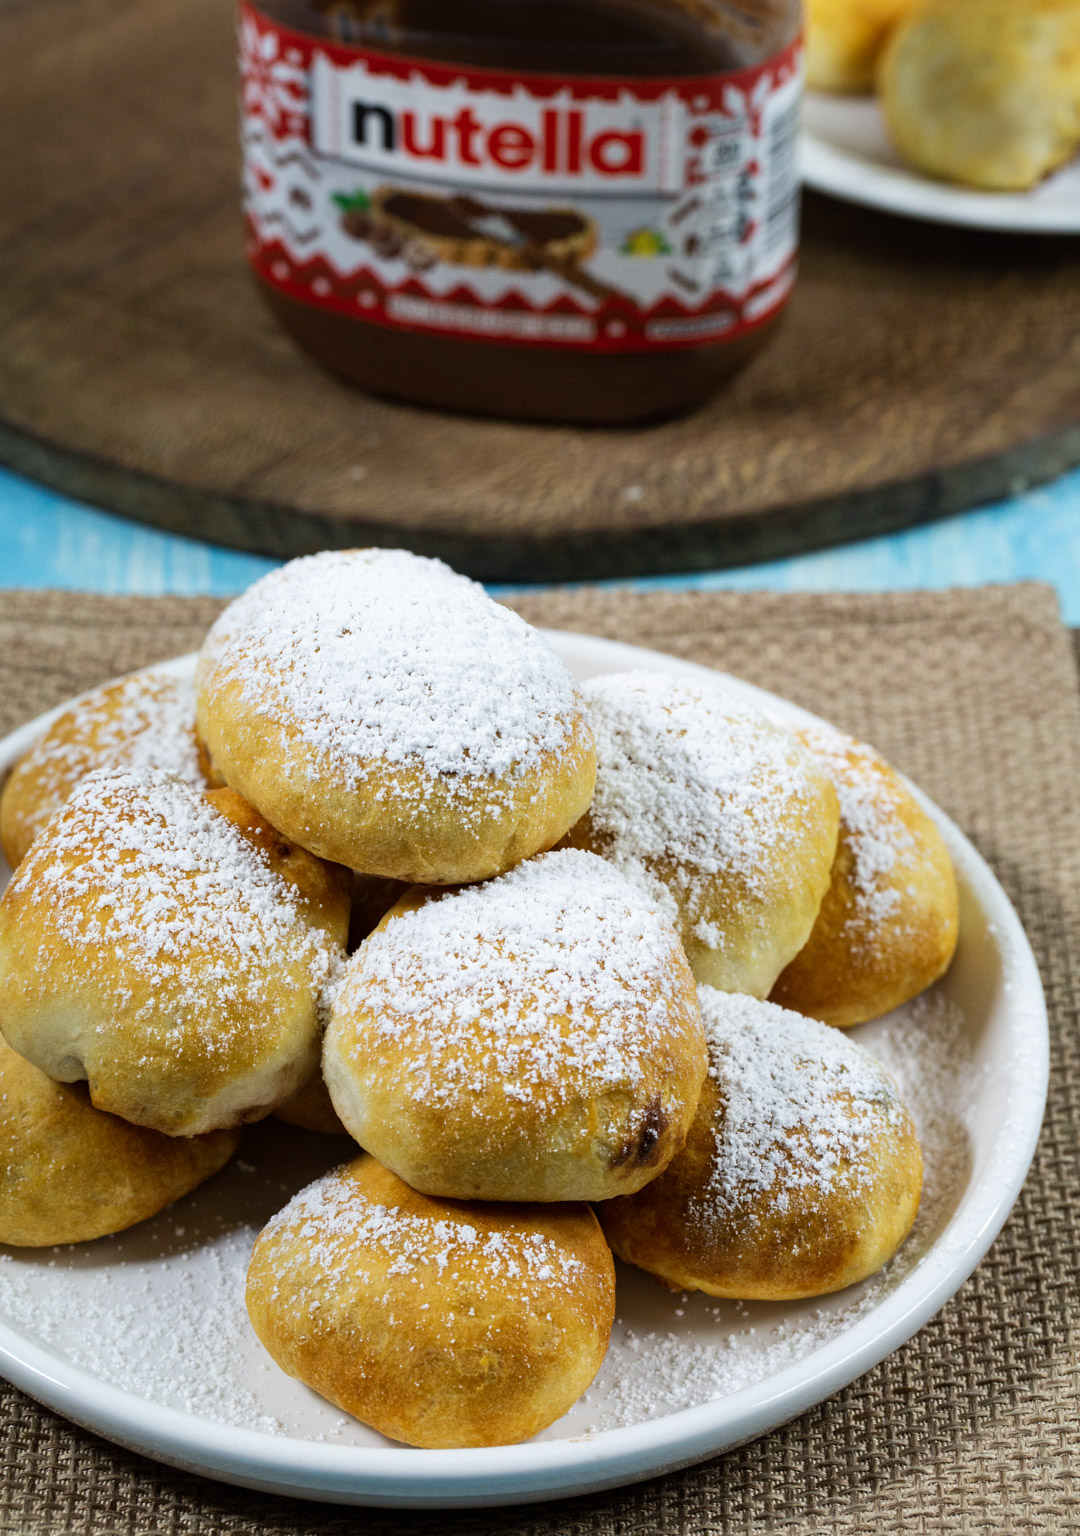 Nutella stuffed biscuits covered in powdered sugar.